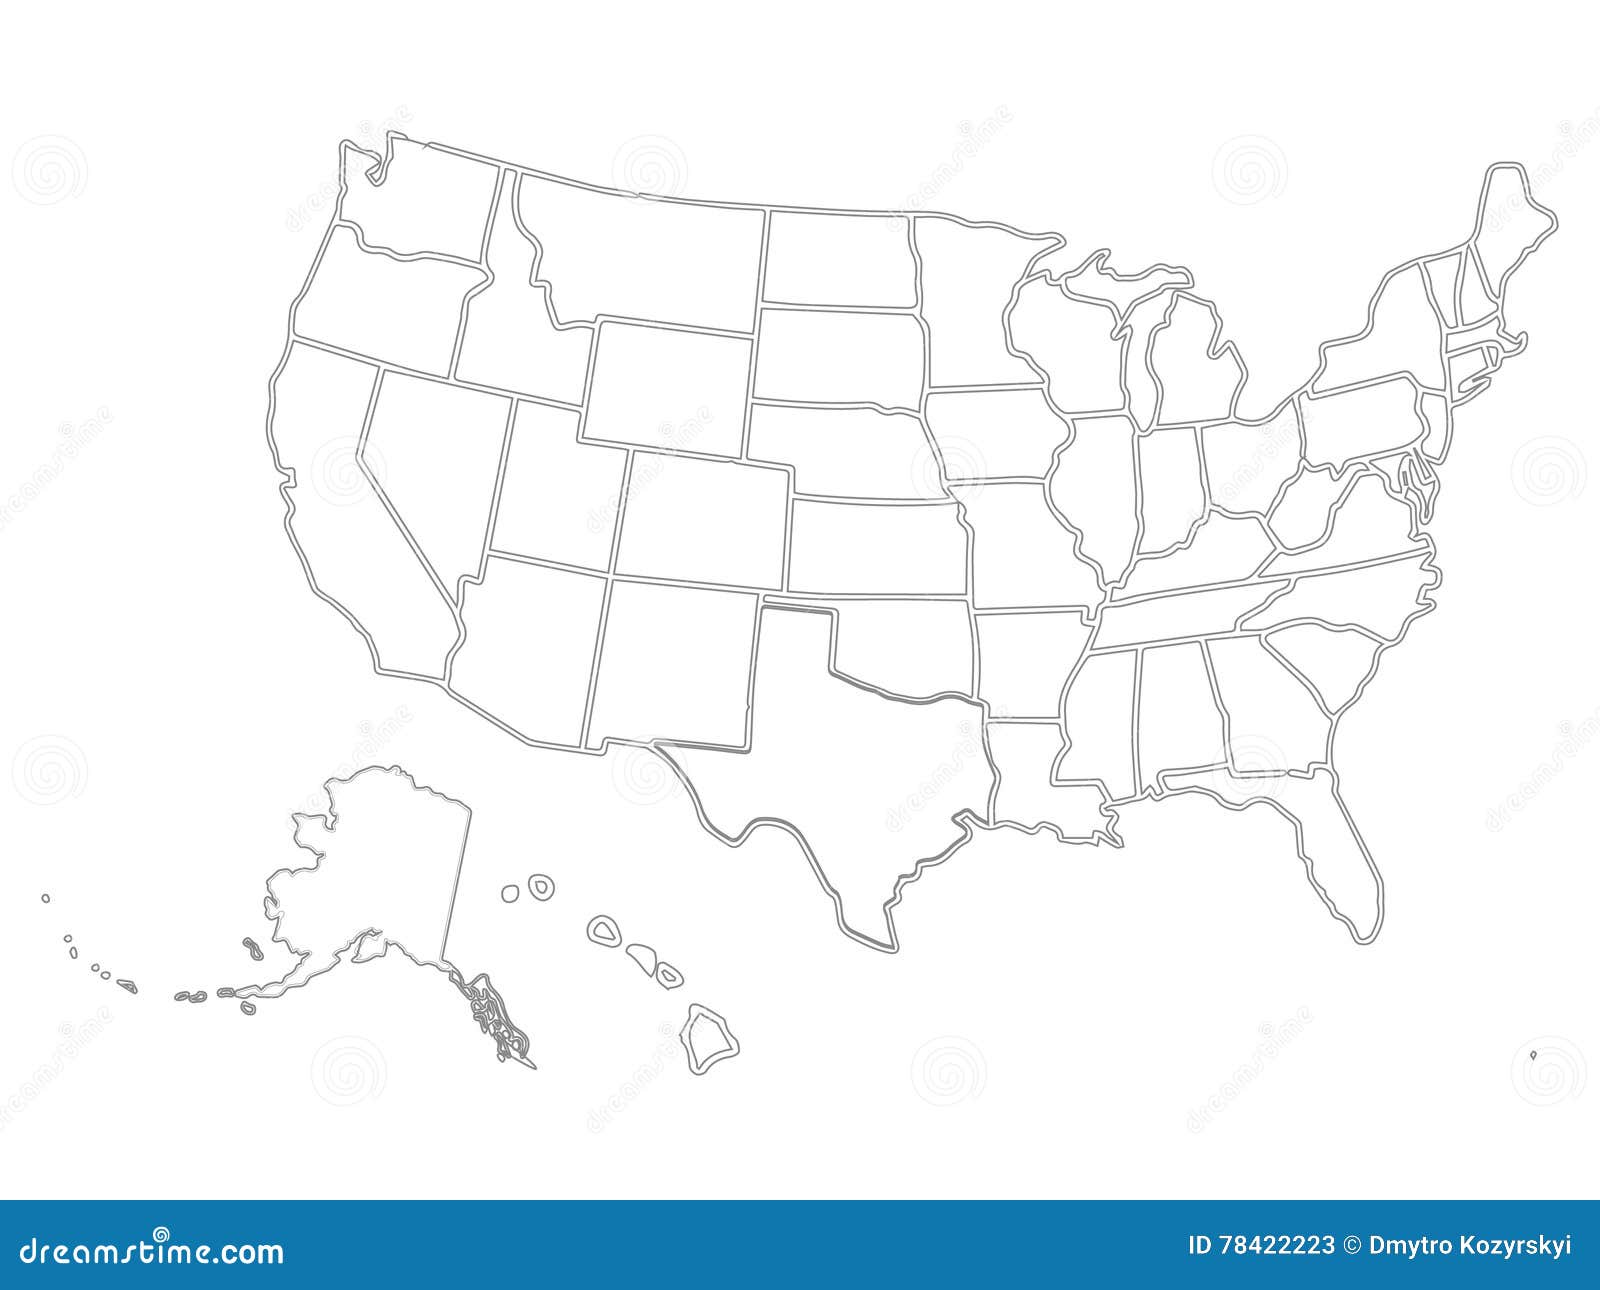 Blank Similar USA Map on White Background. United States of With Blank Template Of The United States